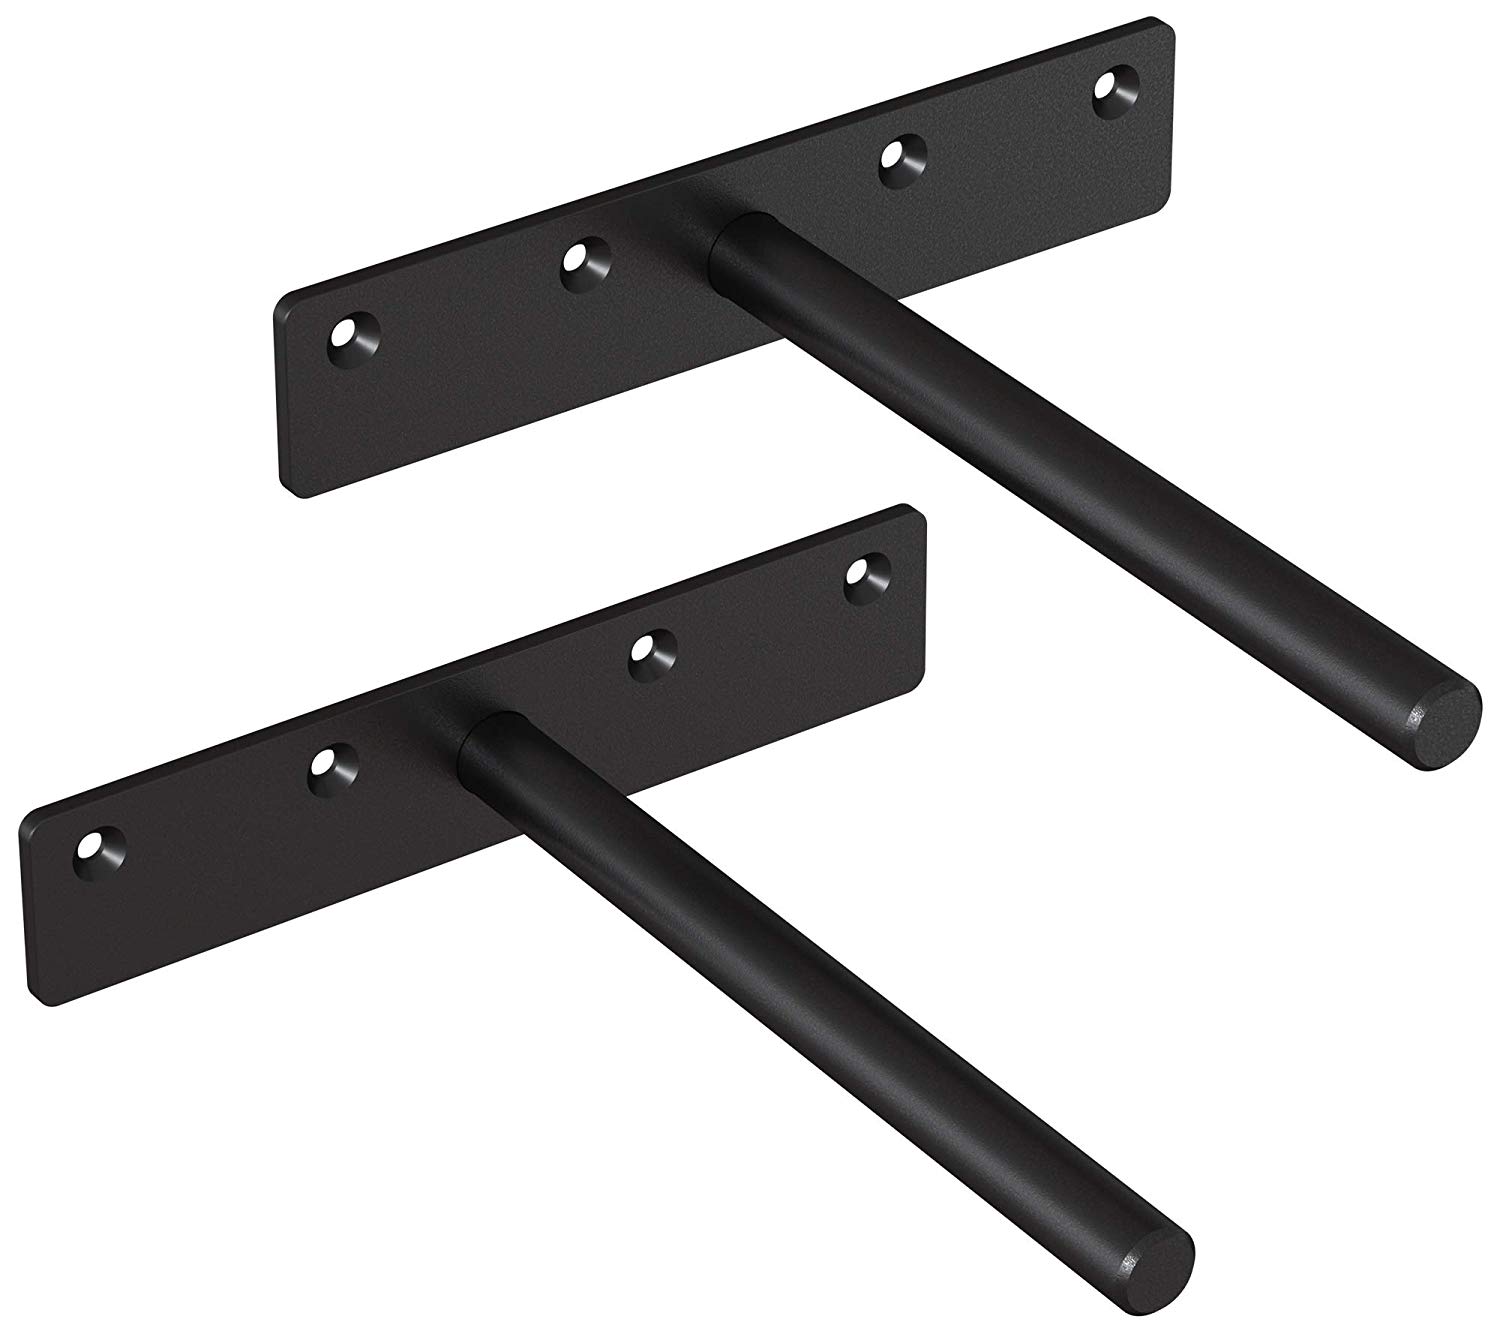 tibres floating shelf brackets heavy duty invisible concealed hidden for wooden rustproof blind supports solid steel set wall hanging bookshelves ikea ikeas shelving unit stick